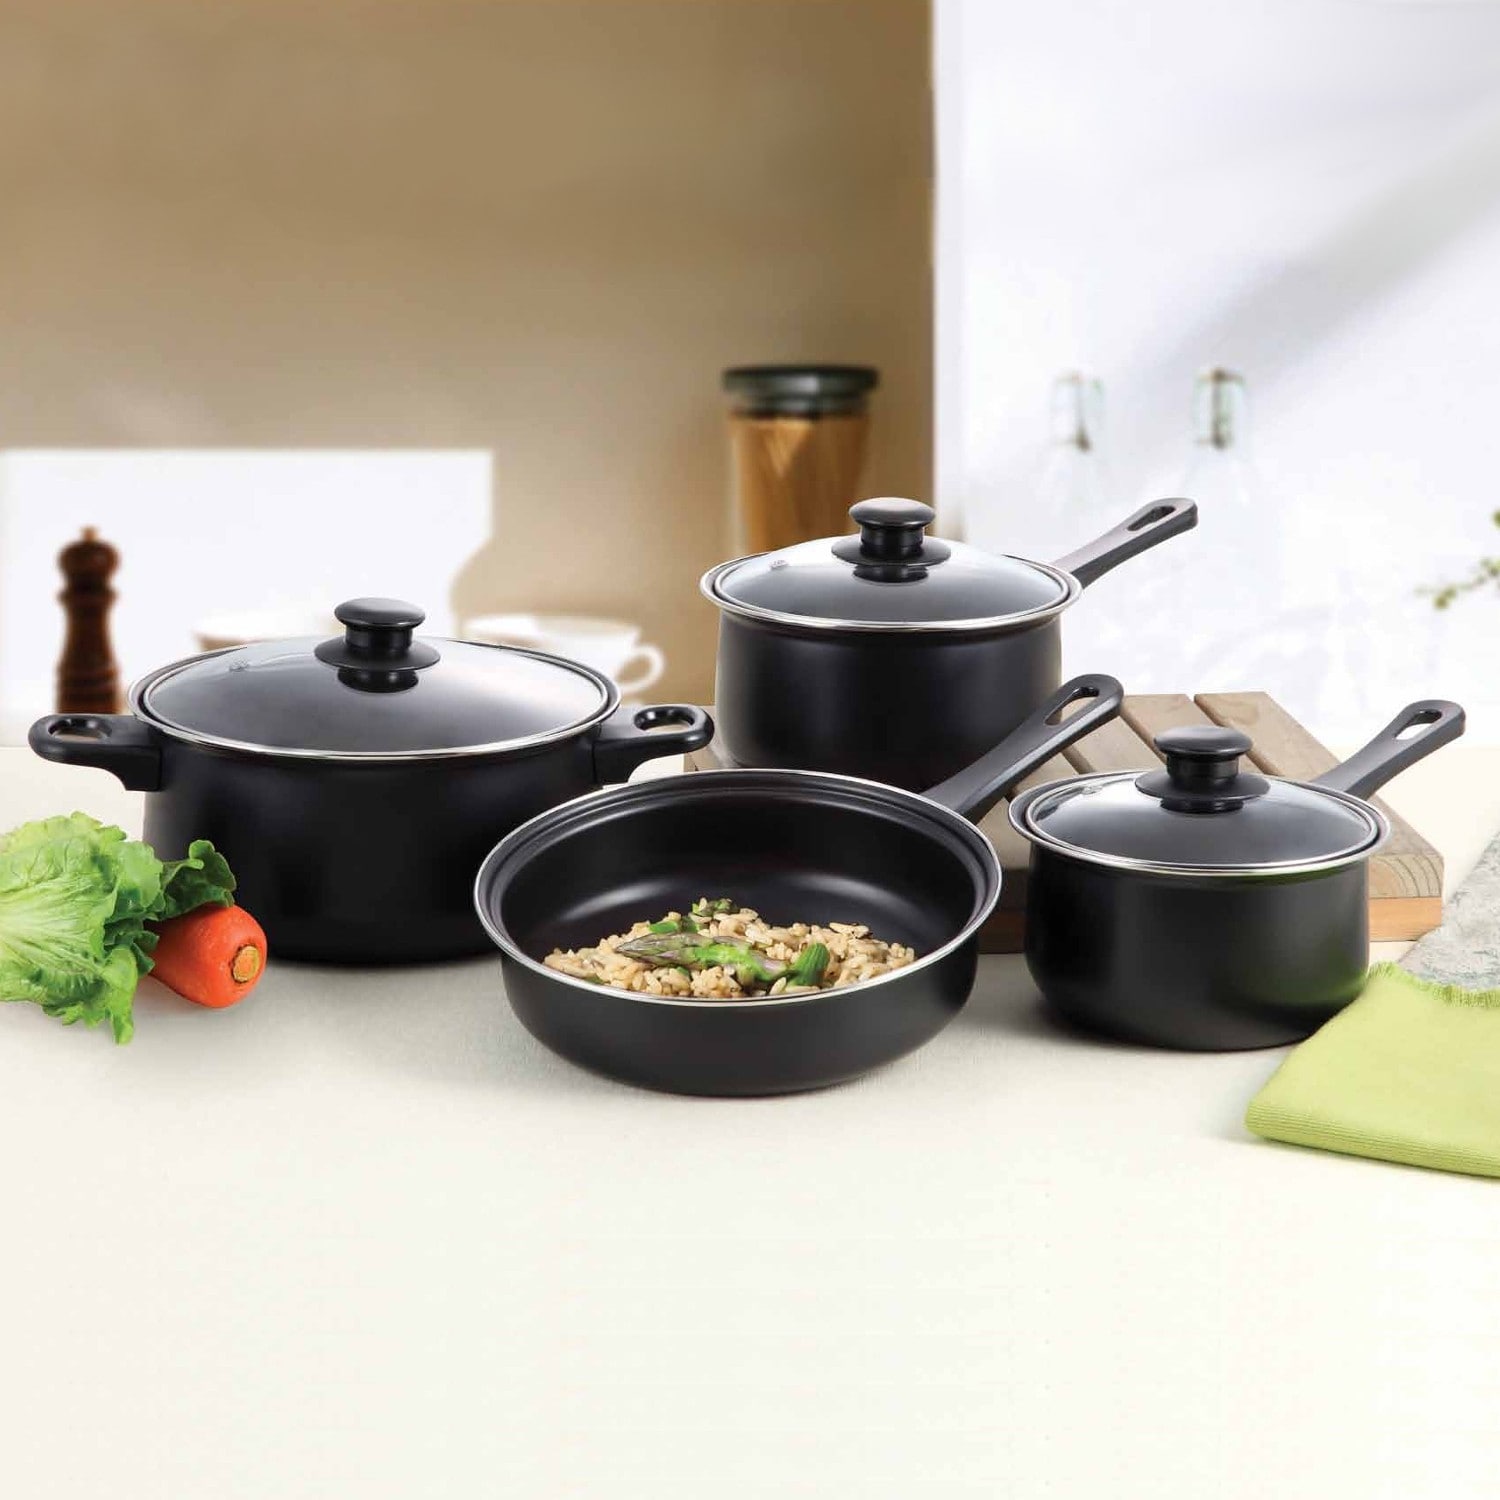 https://ak1.ostkcdn.com/images/products/is/images/direct/7fb340c2a92f130decbcc8e0dc057aee6bd202e5/Gibson-Home-Chef-Du-Jour-7-Piece-Carbon-Steel-Nonstick-Cookware-Set.jpg